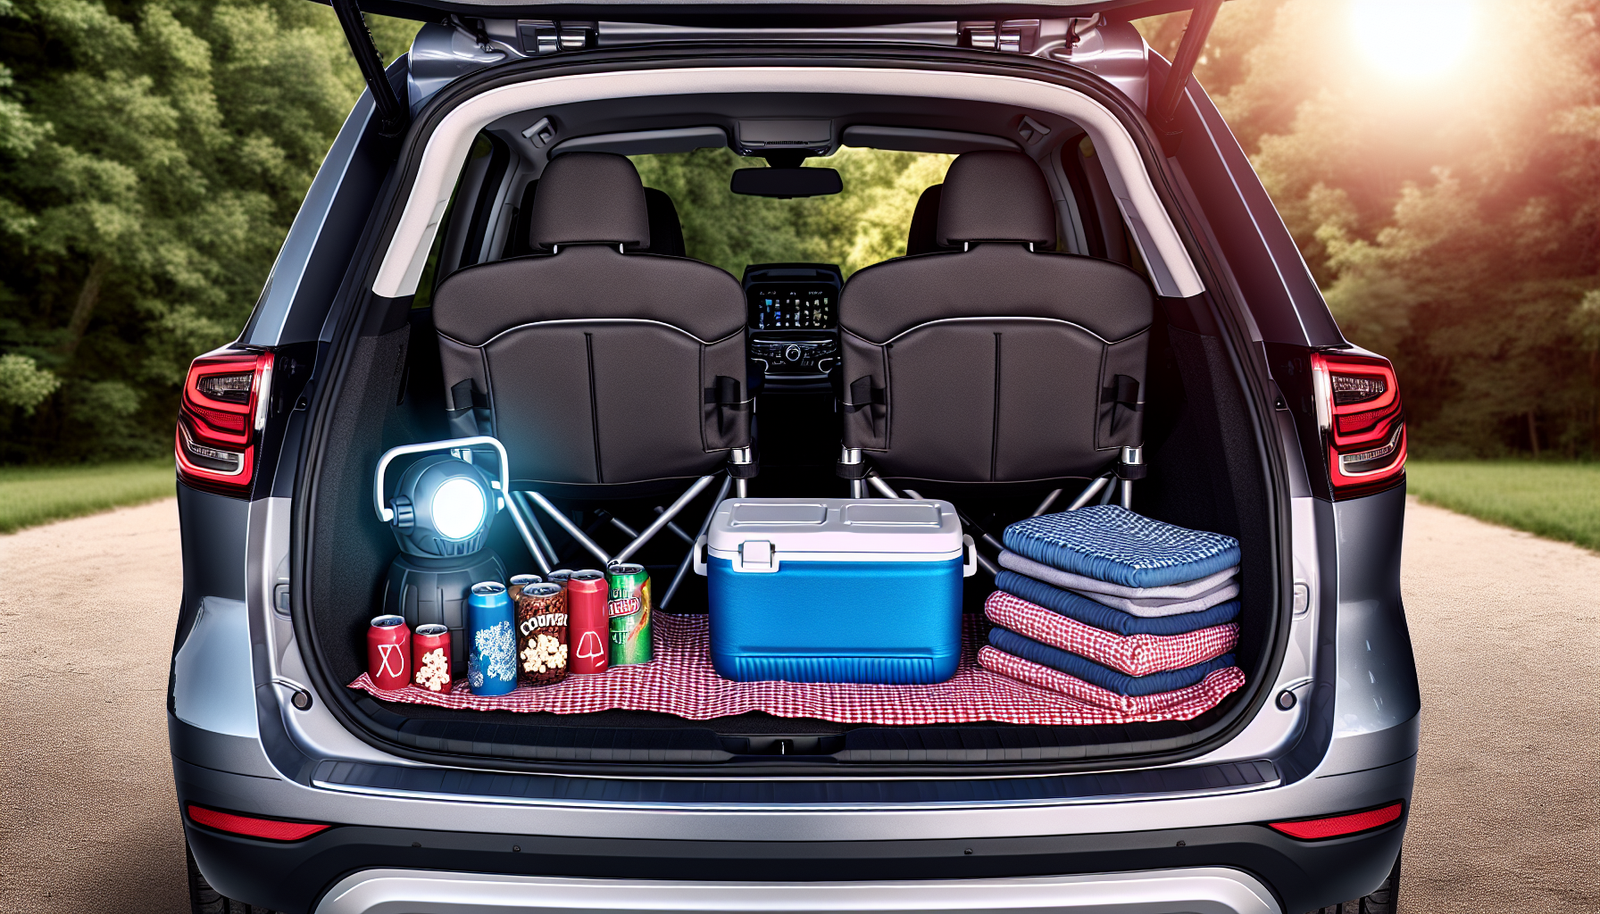 Preparing for a drive-in adventure with packed essentials and comfortable seating